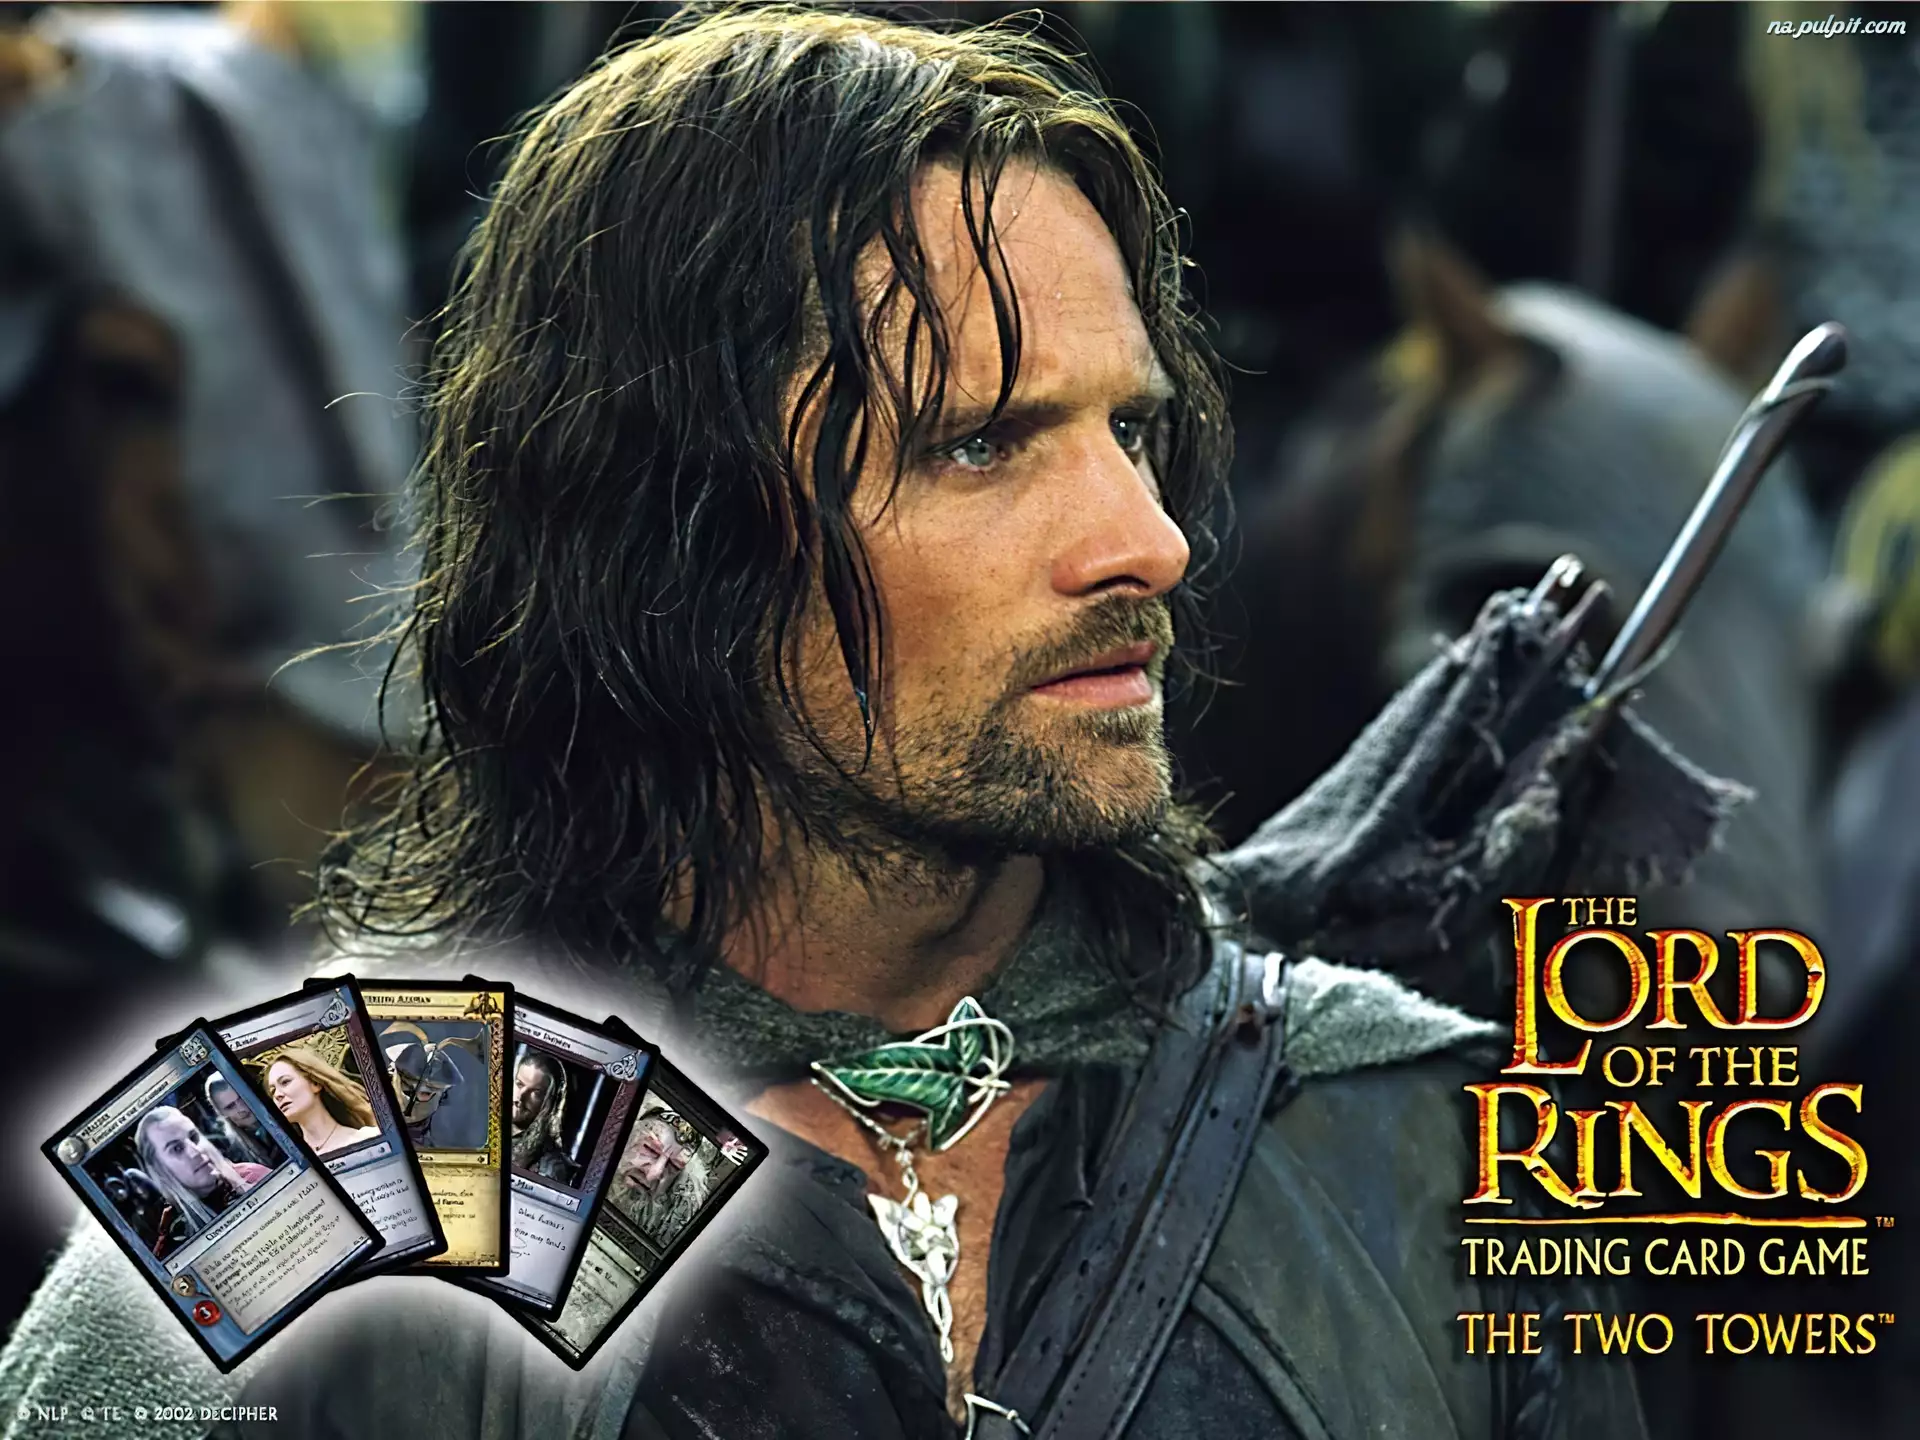 The Lord of The Rings, karty, Viggo Mortensen, zbroja